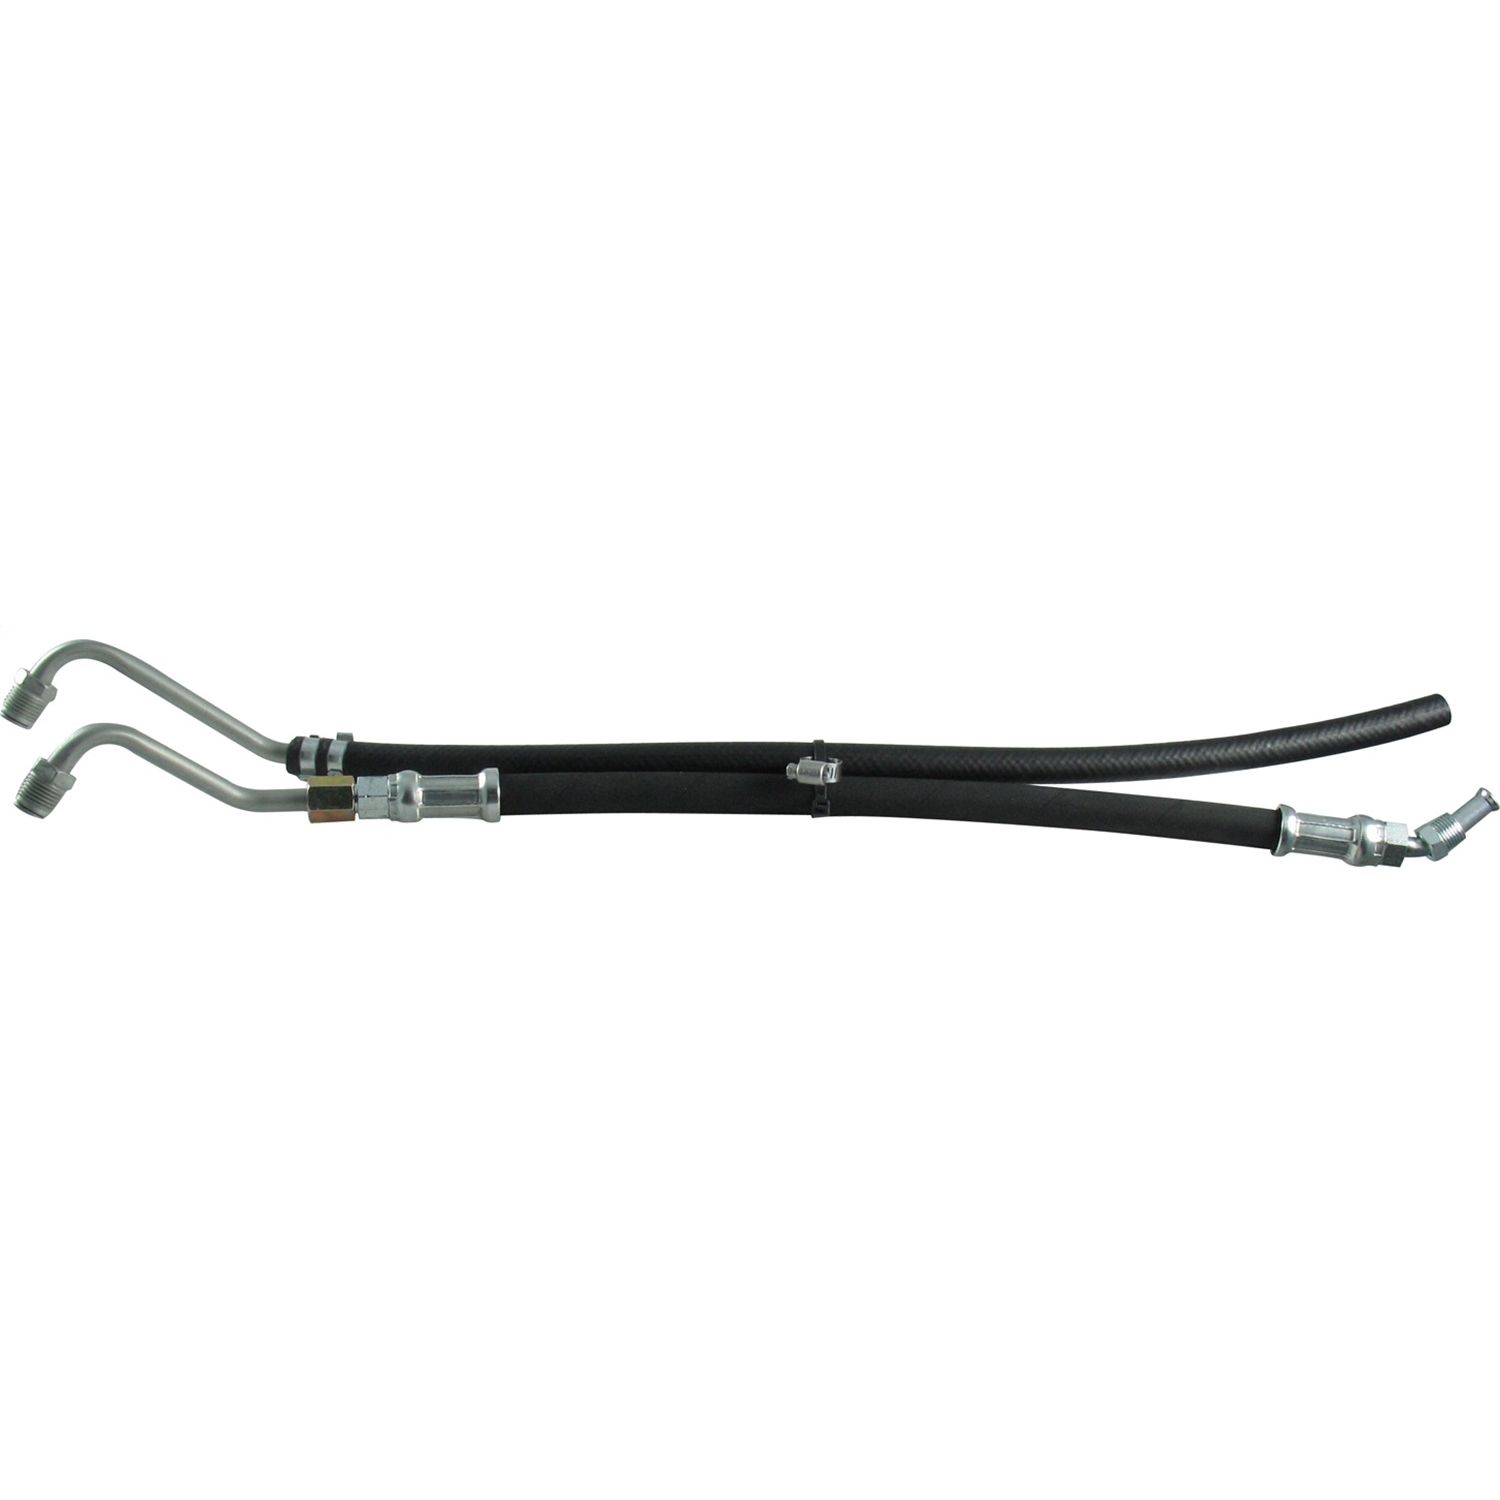 Borgeson - Power Steering Hose Kit - P/N: 925108 - 2 Piece OEM style rubber power steering hose kit. Connects GM power steering pump to Borgeson Mustang power conversion box. V-8 applications only.